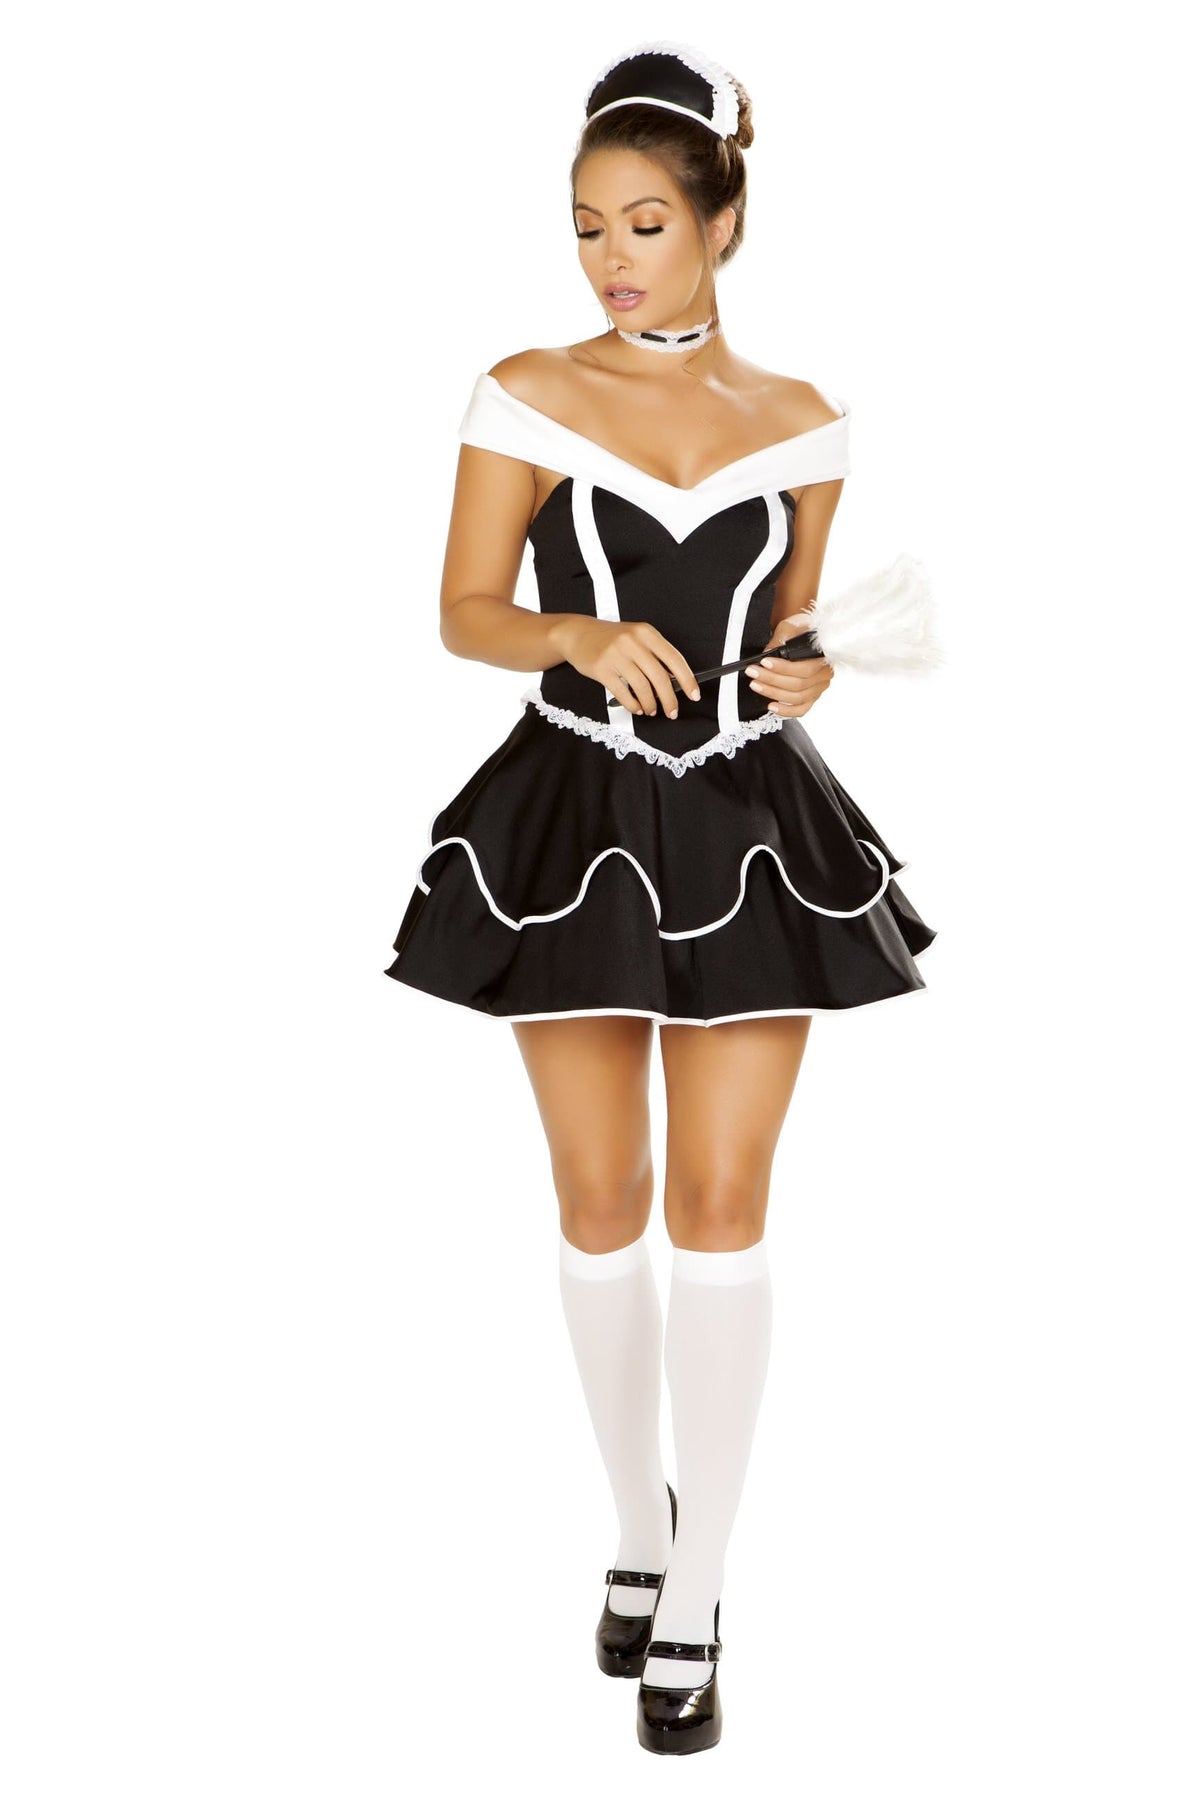 Roma Small / Black 4pc Sexy Chamber Maid SHC-4886-S-R Apparel &amp; Accessories &gt; Costumes &amp; Accessories &gt; Costumes